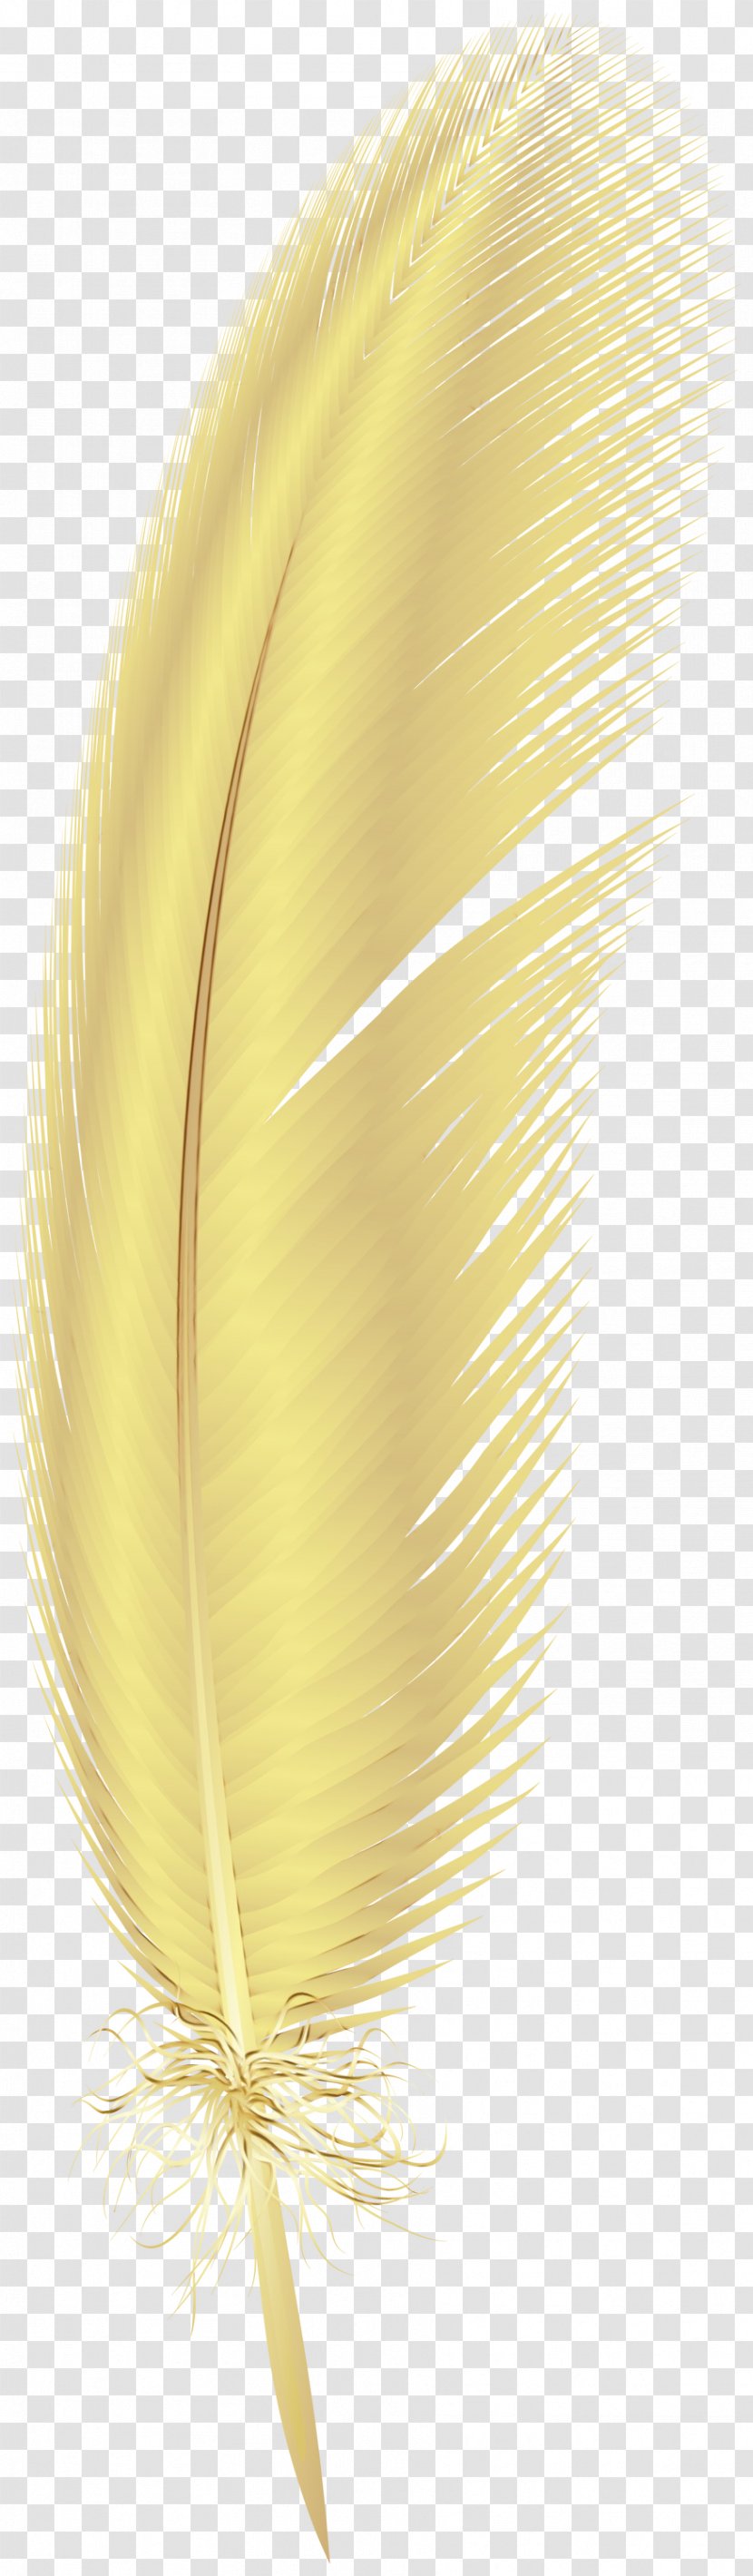 Feather - Quill Fashion Accessory Transparent PNG